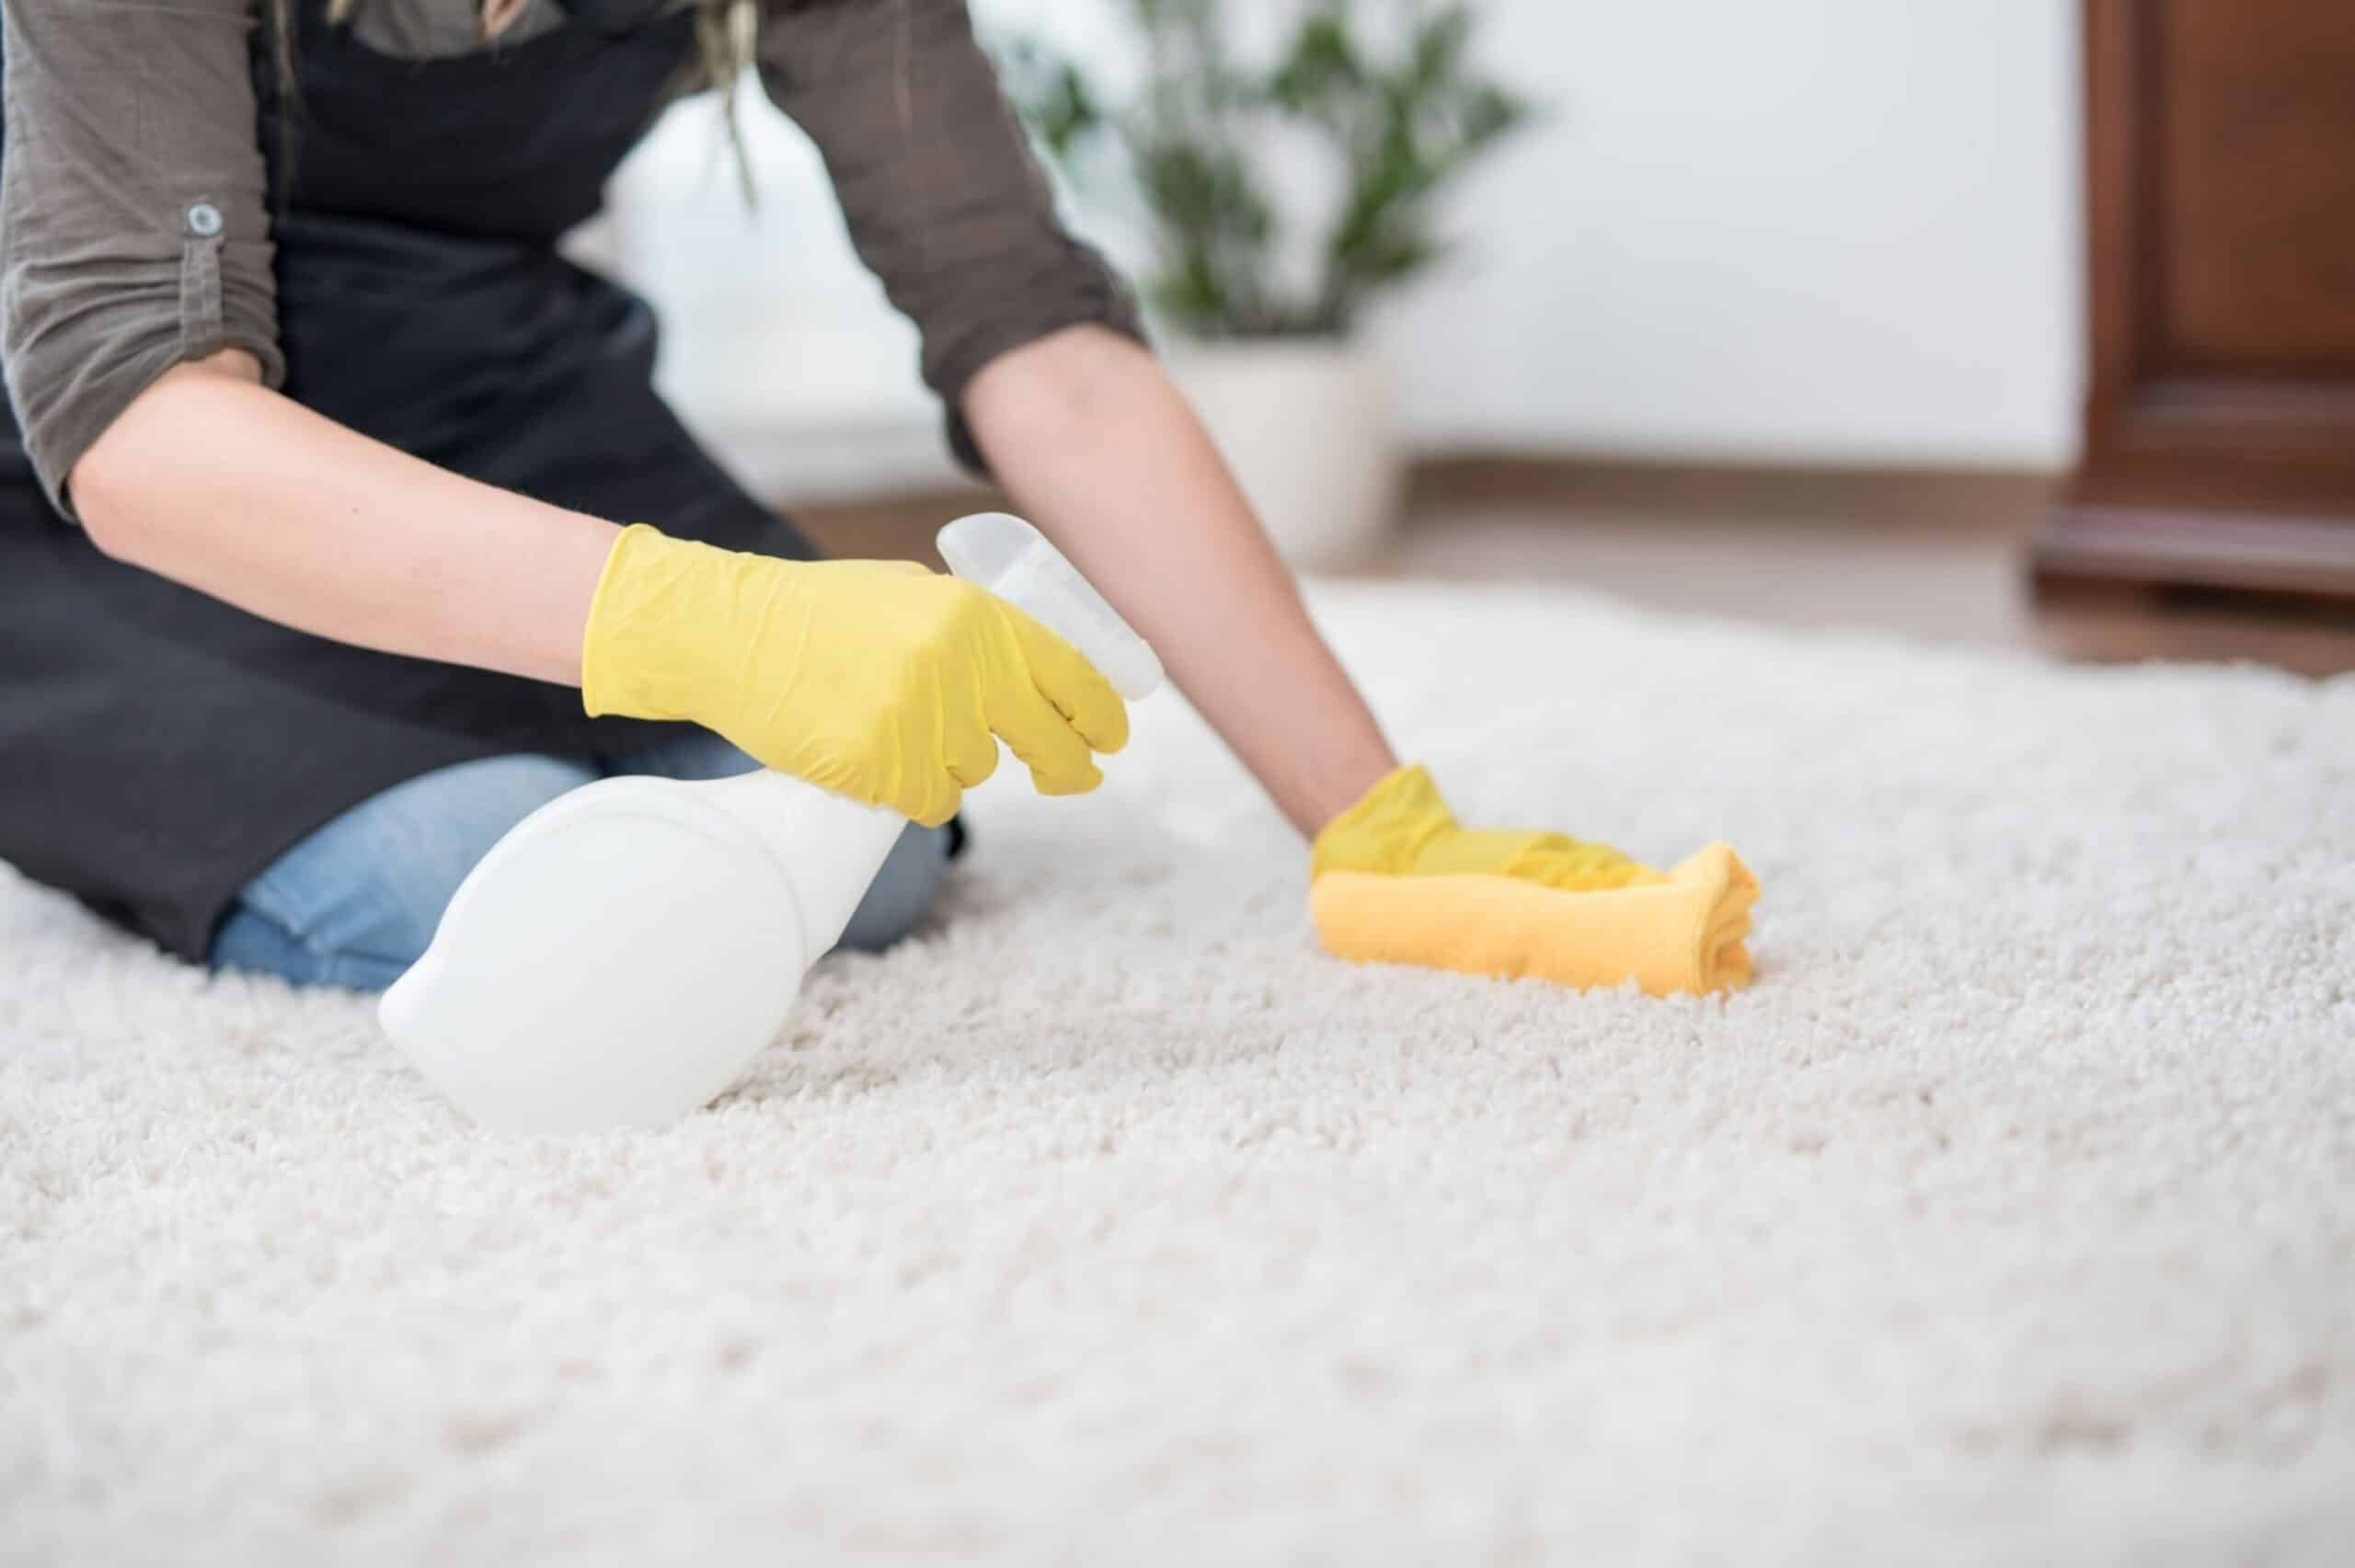 How to Clean Vomit From Your Carpet Image Woman Cleaning Carpet.